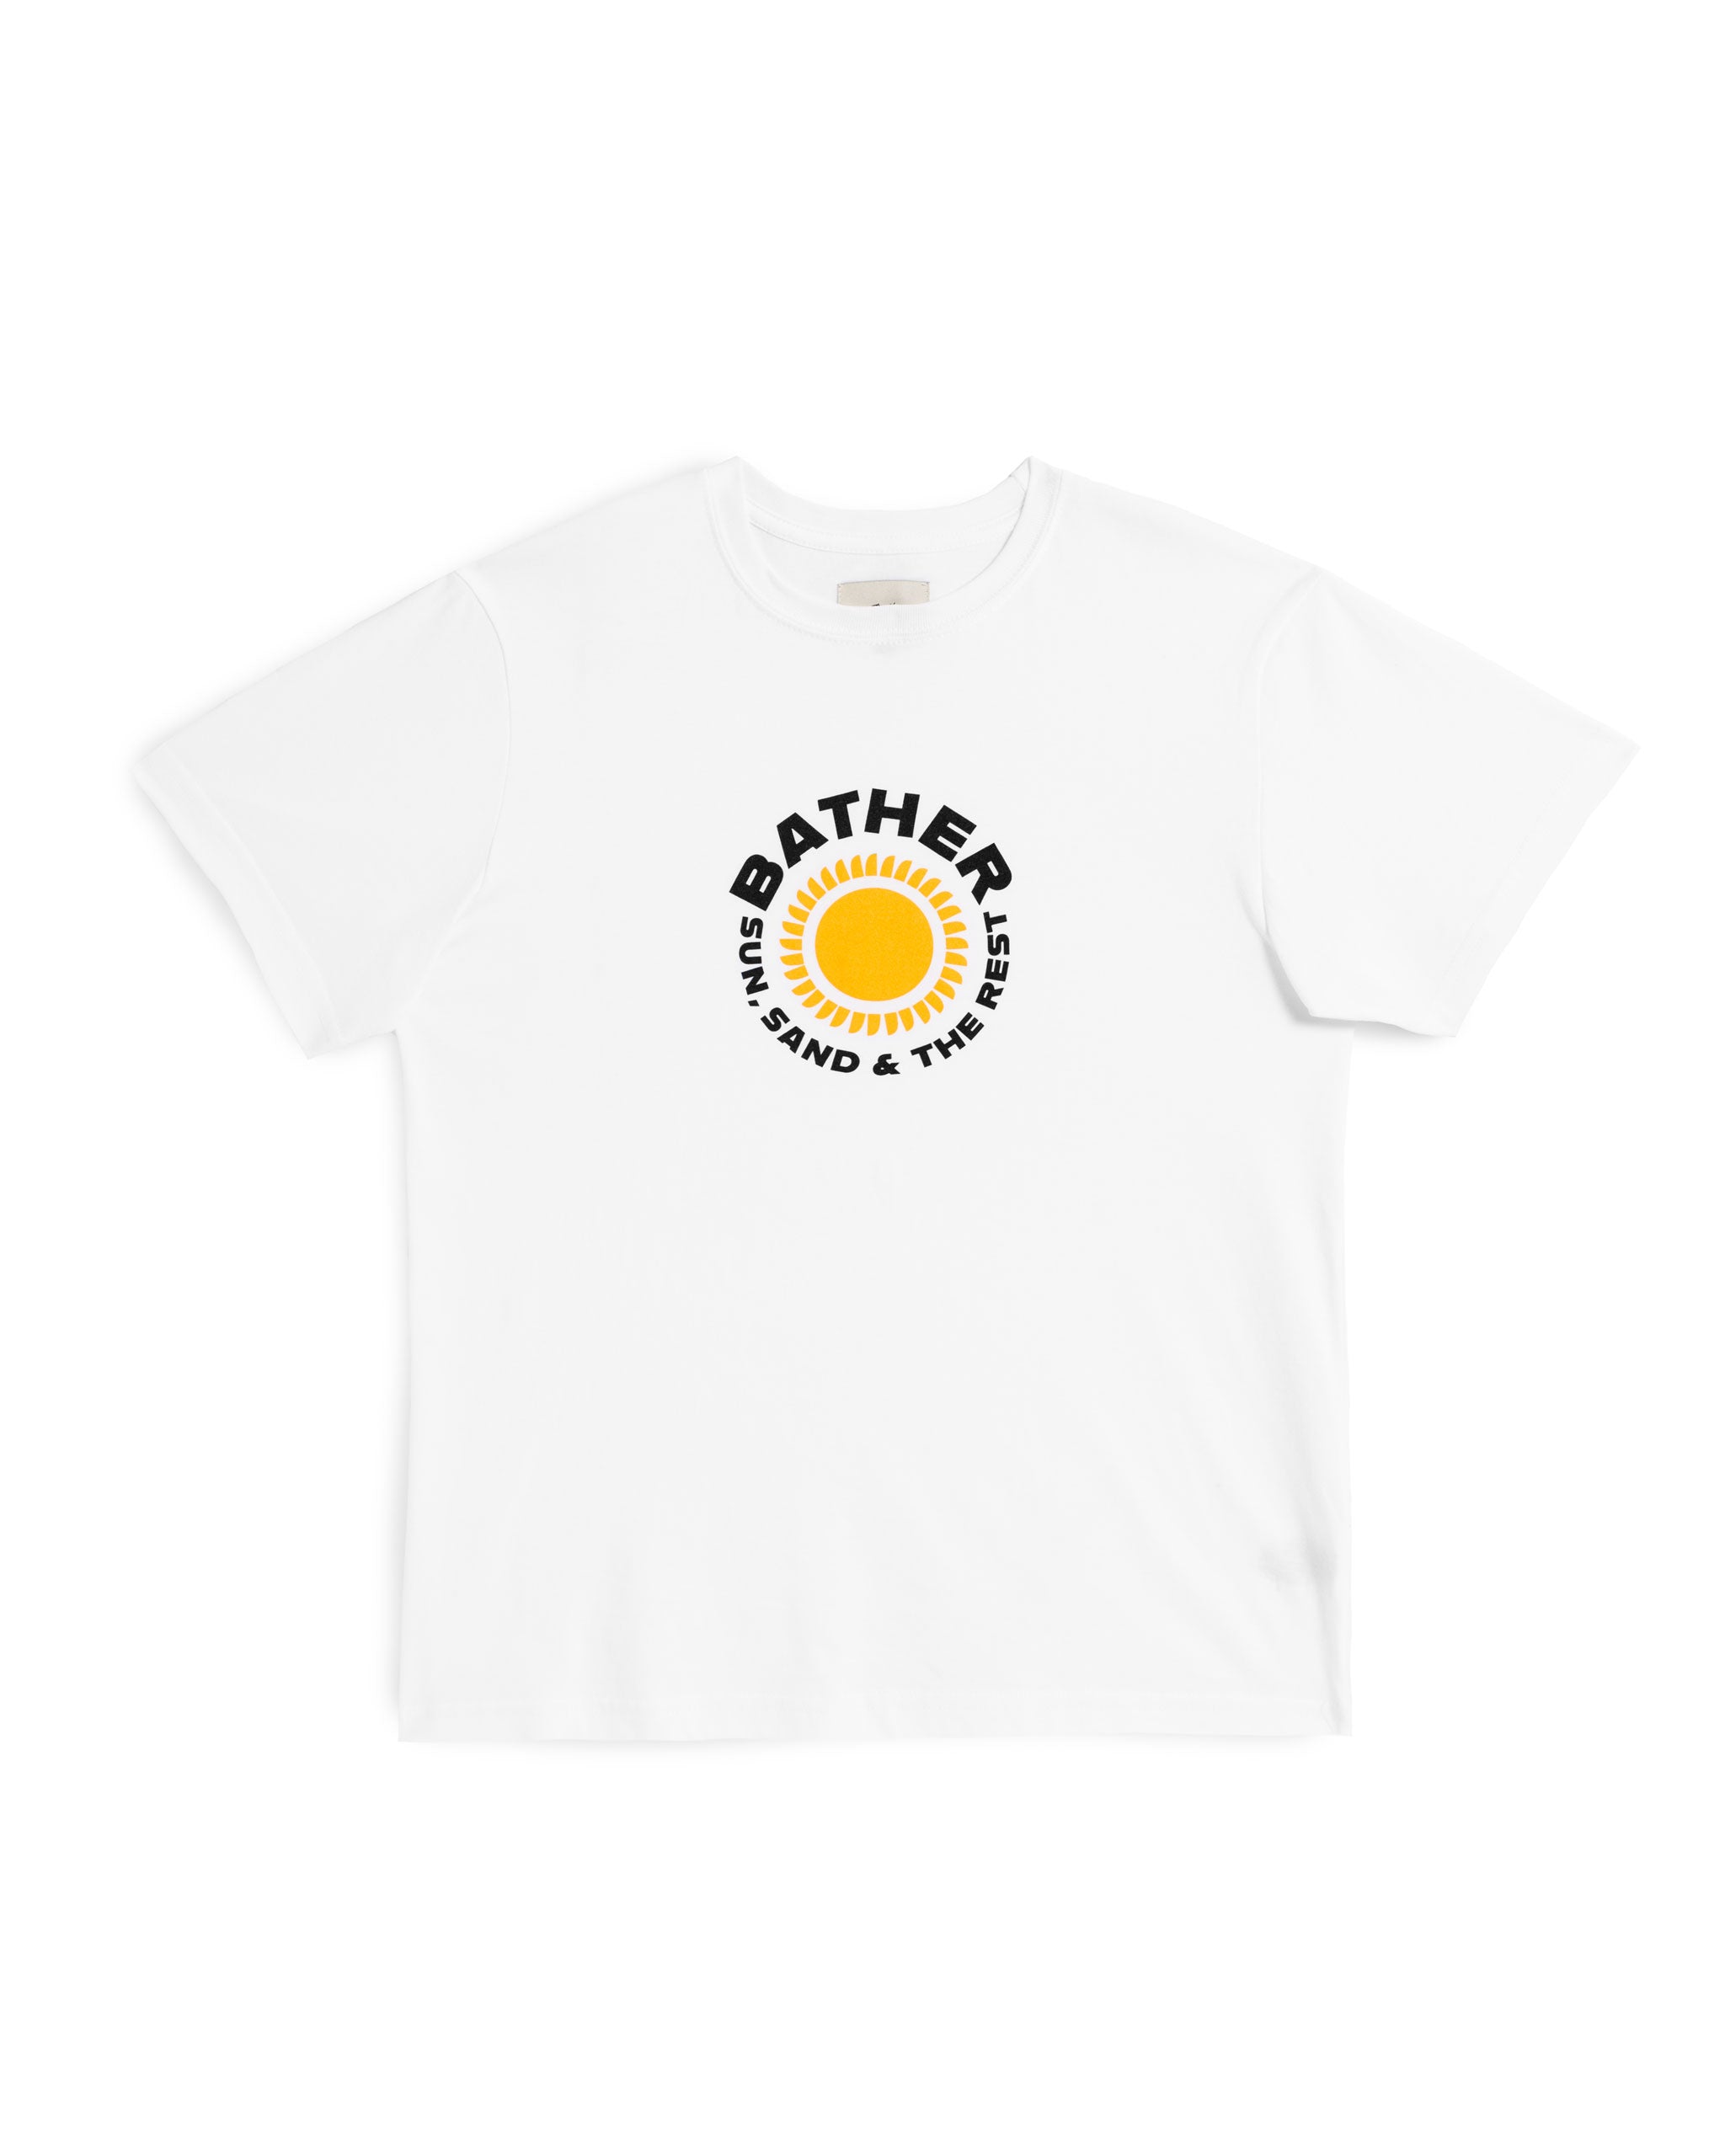 White sun, sand, and the rest graphic cotton t-shirt